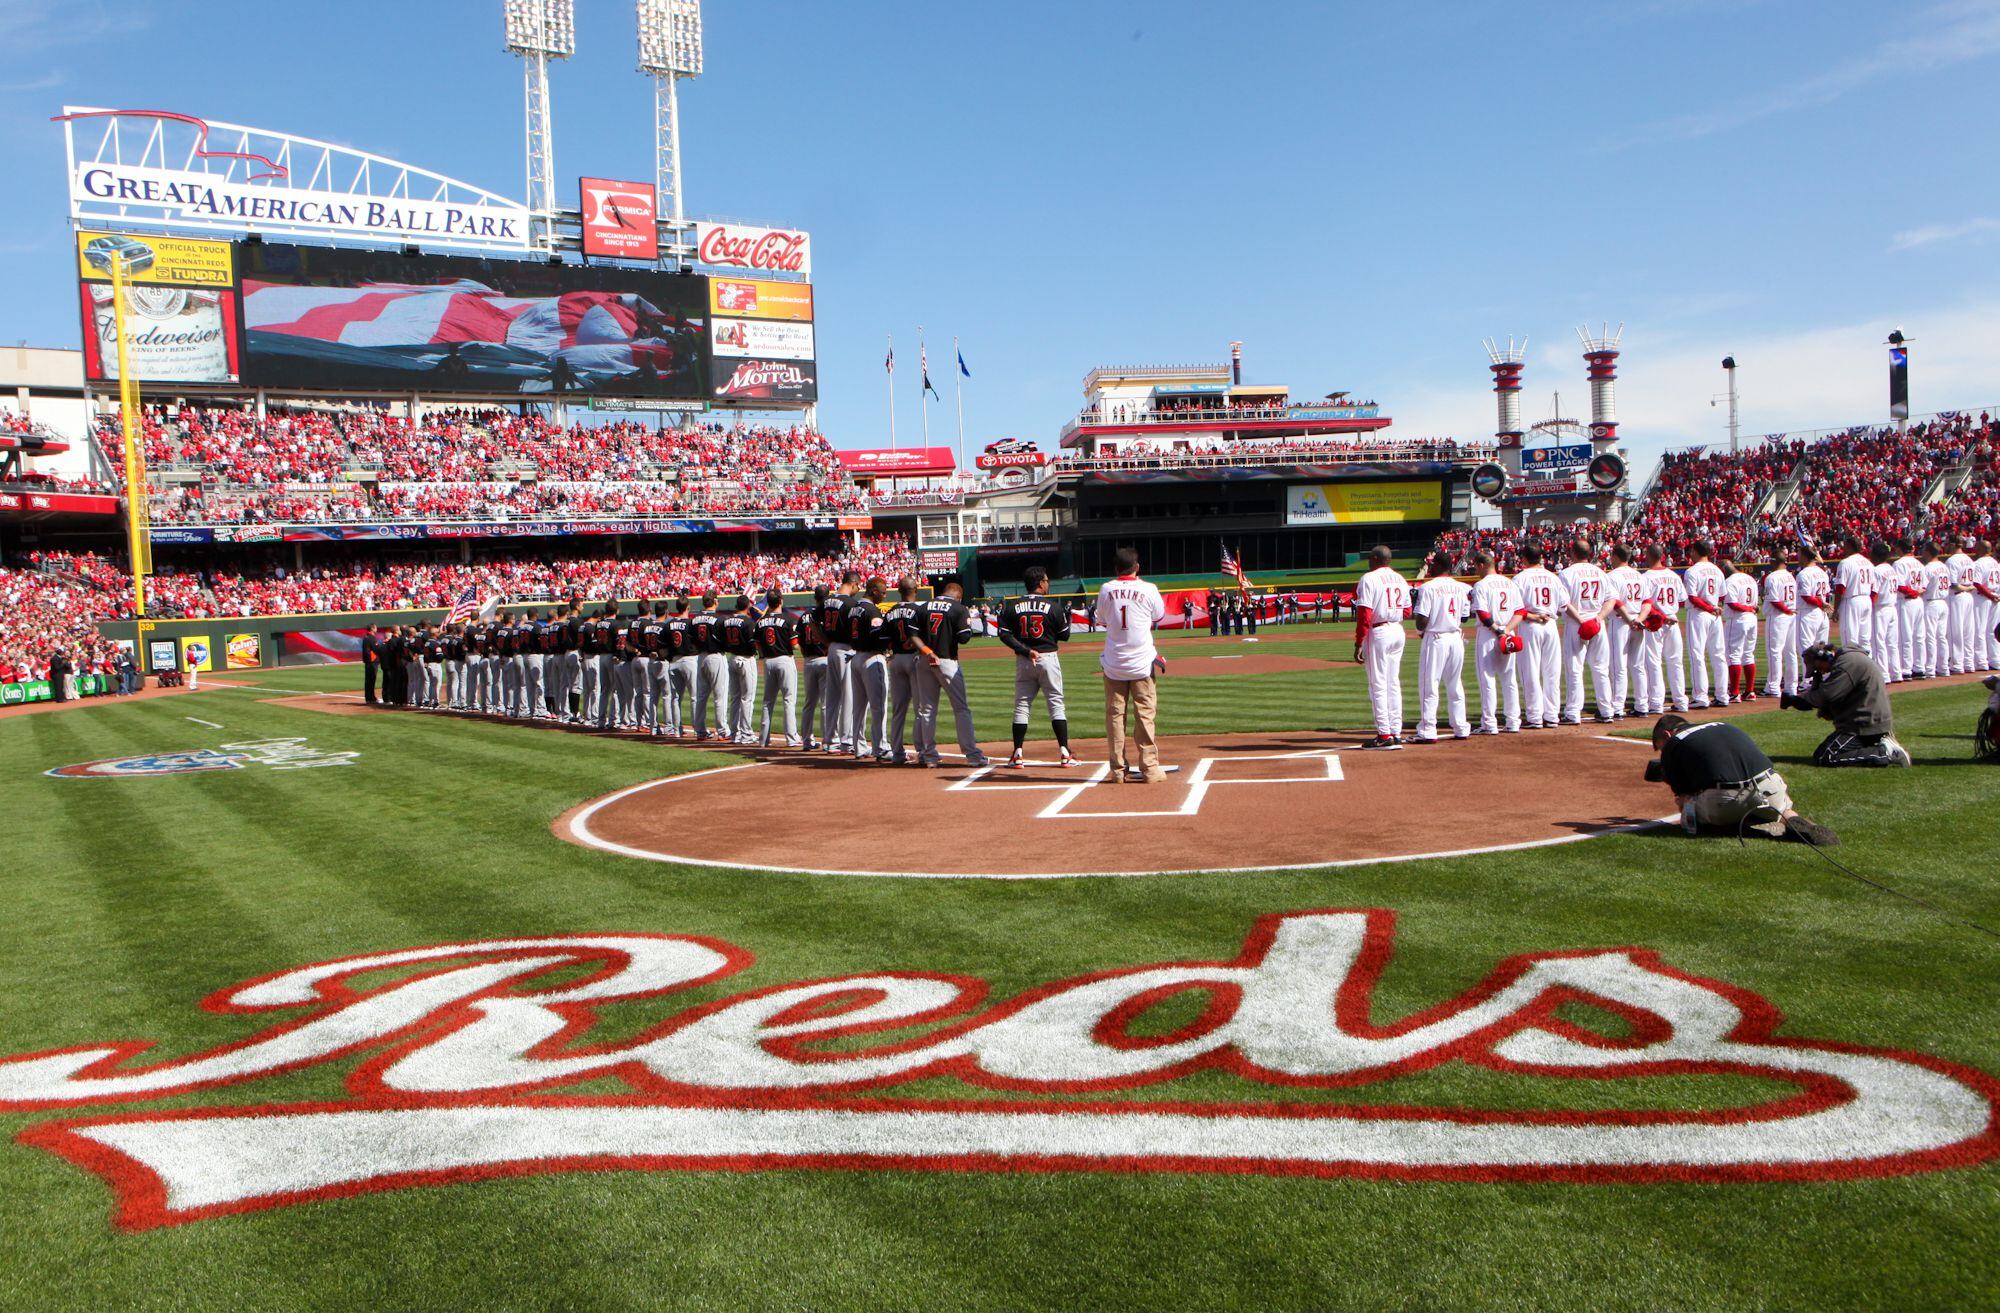 It was a great day at Great American Ballpark!